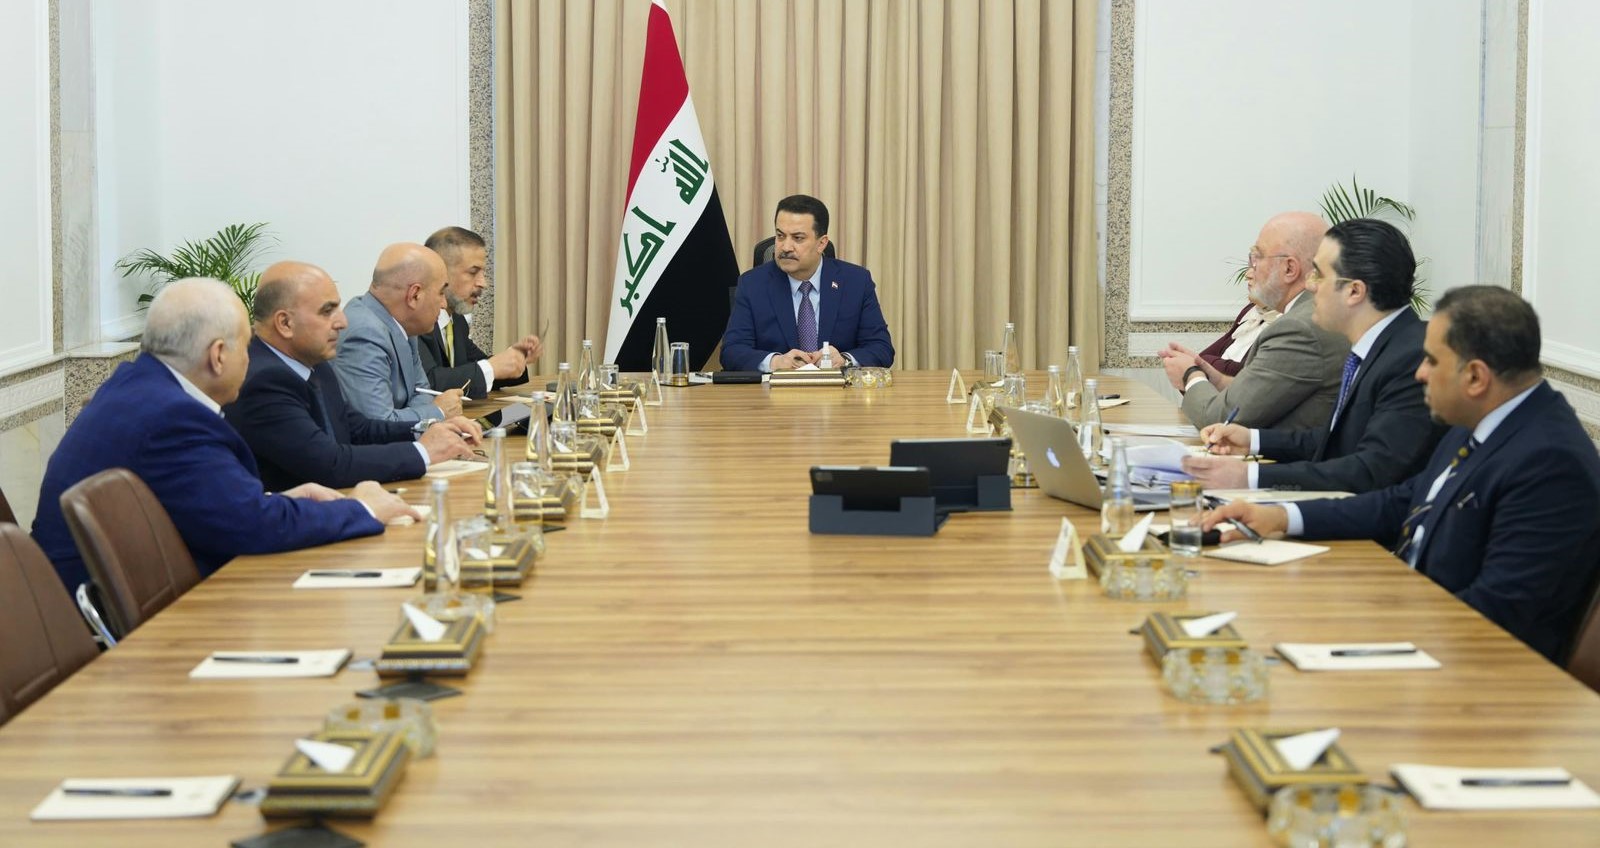 Al-Sudani chairs a meeting to localize Iraqi industries and attract foreign investments